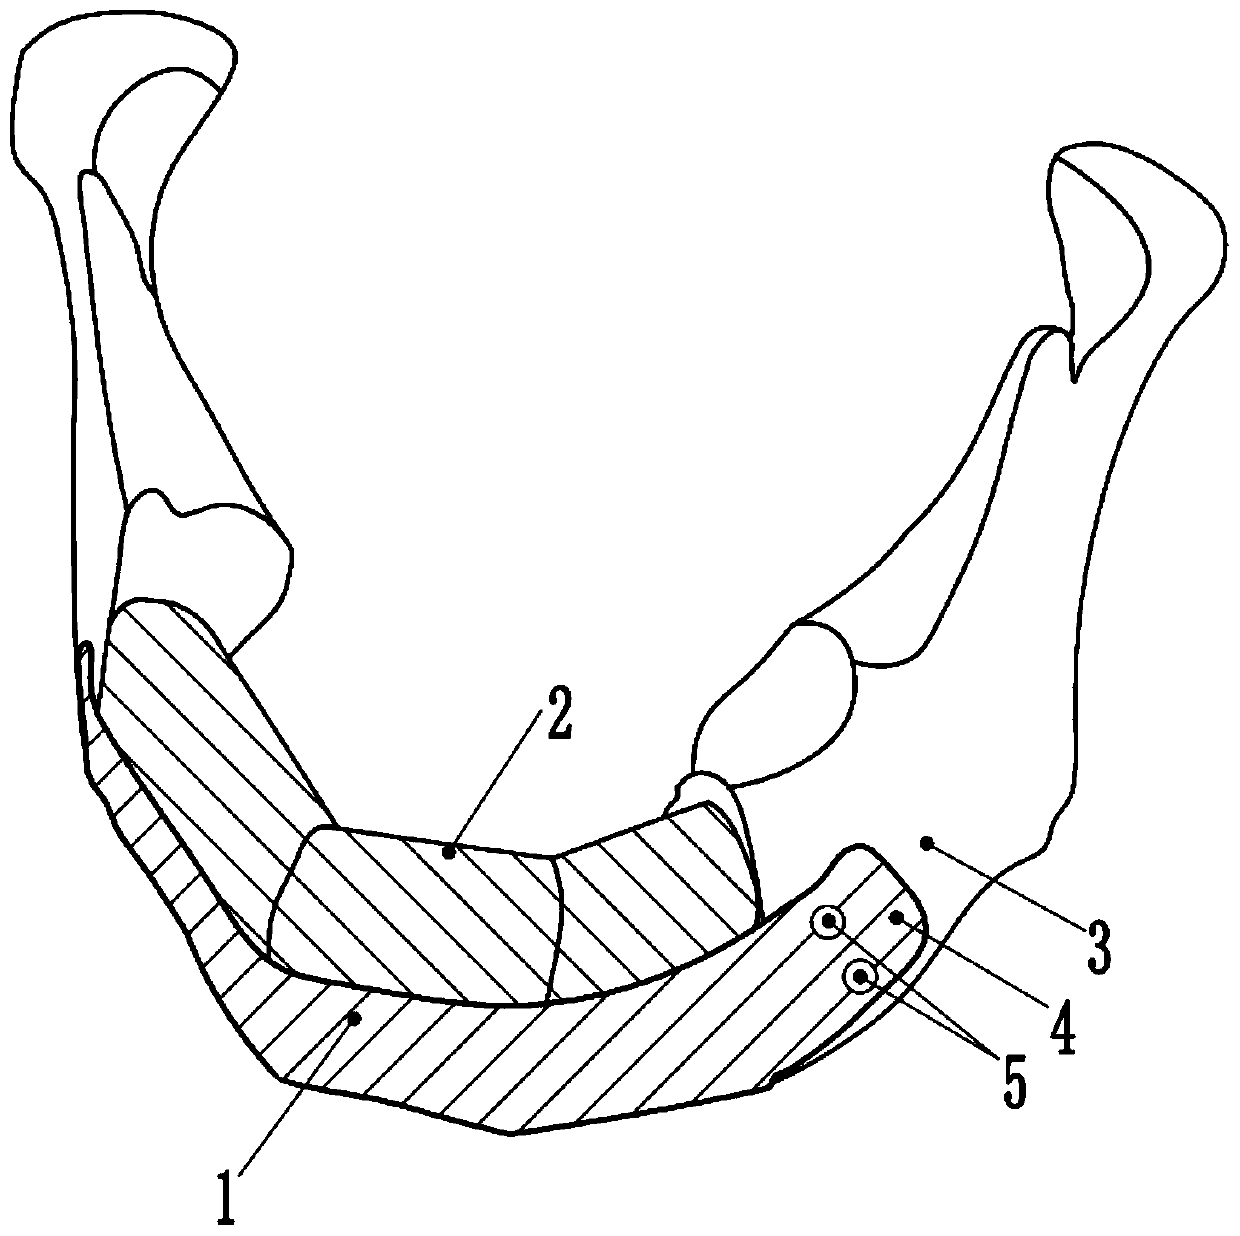 Personalized mandible substitute compounded with autologous bone